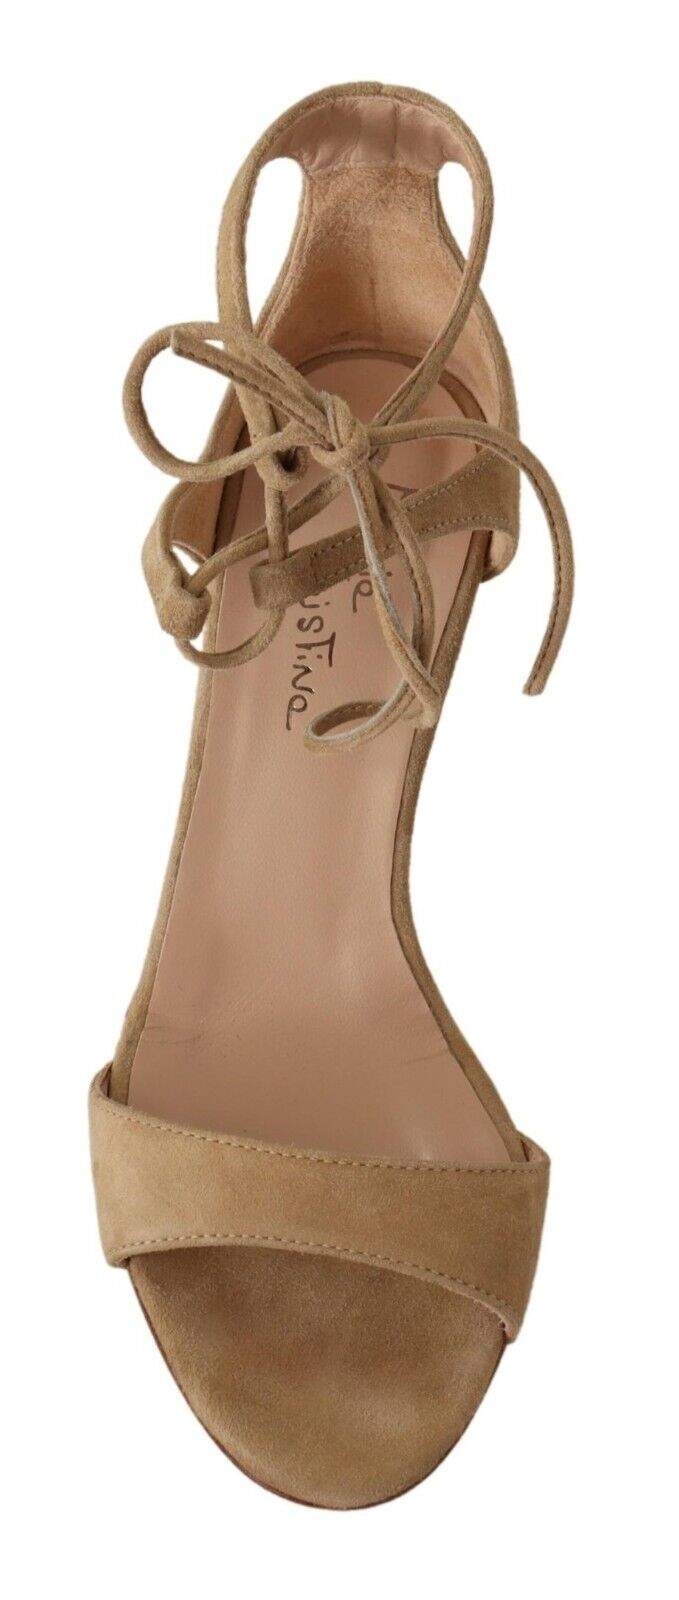 MARIA CHRISTINA Beige Suede Leather Ankle Strap Pumps Beige, EU35/US4.5, feed-1, MARIA CHRISTINA, Pumps - Women - Shoes at SEYMAYKA